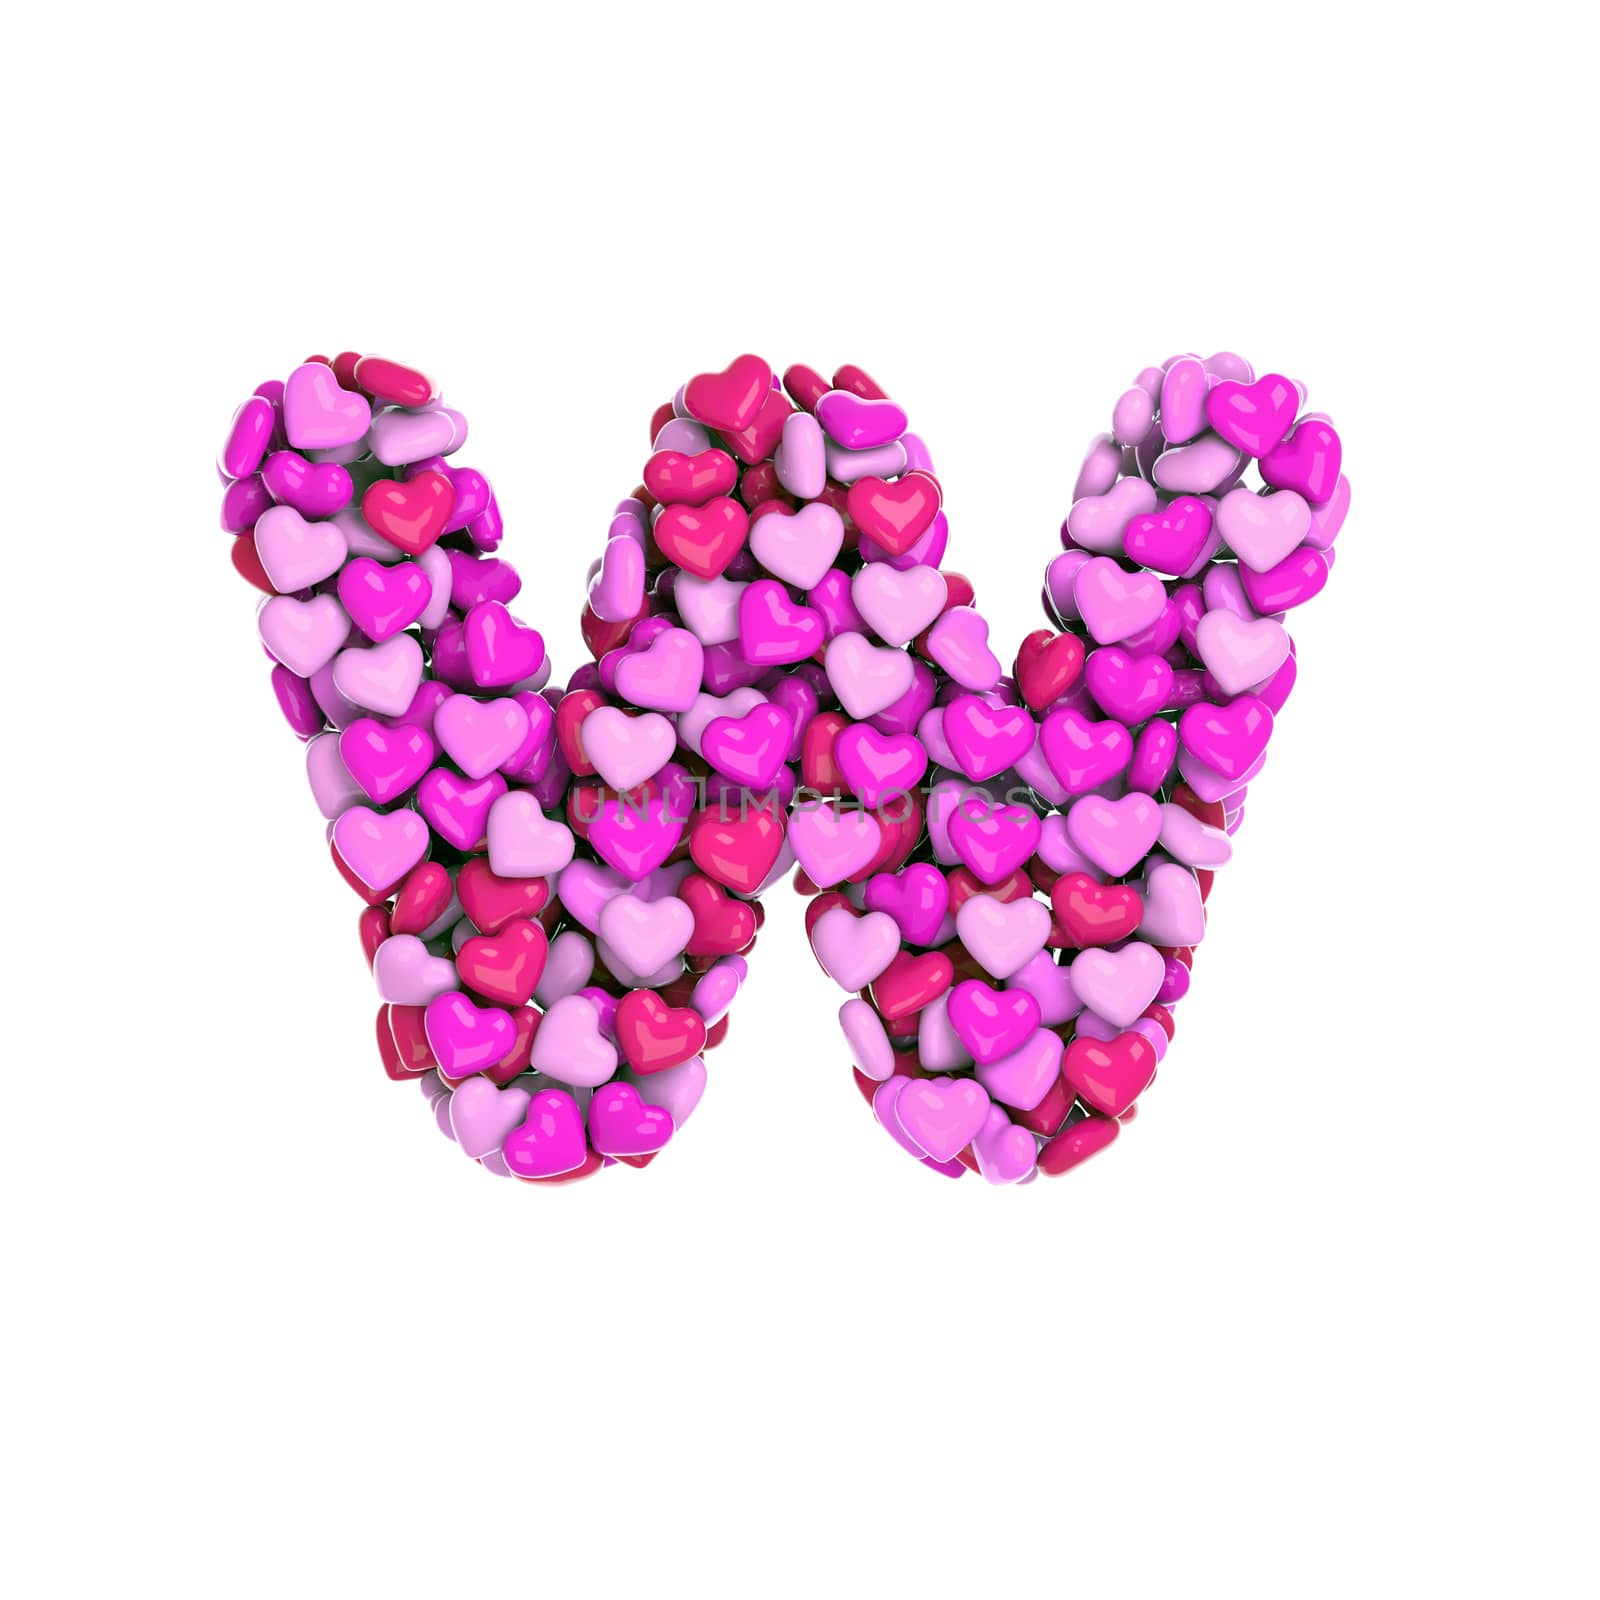 Valentine letter W - Lower-case 3d pink hearts font isolated on white background. This alphabet is perfect for creative illustrations related but not limited to Love, passion, wedding...